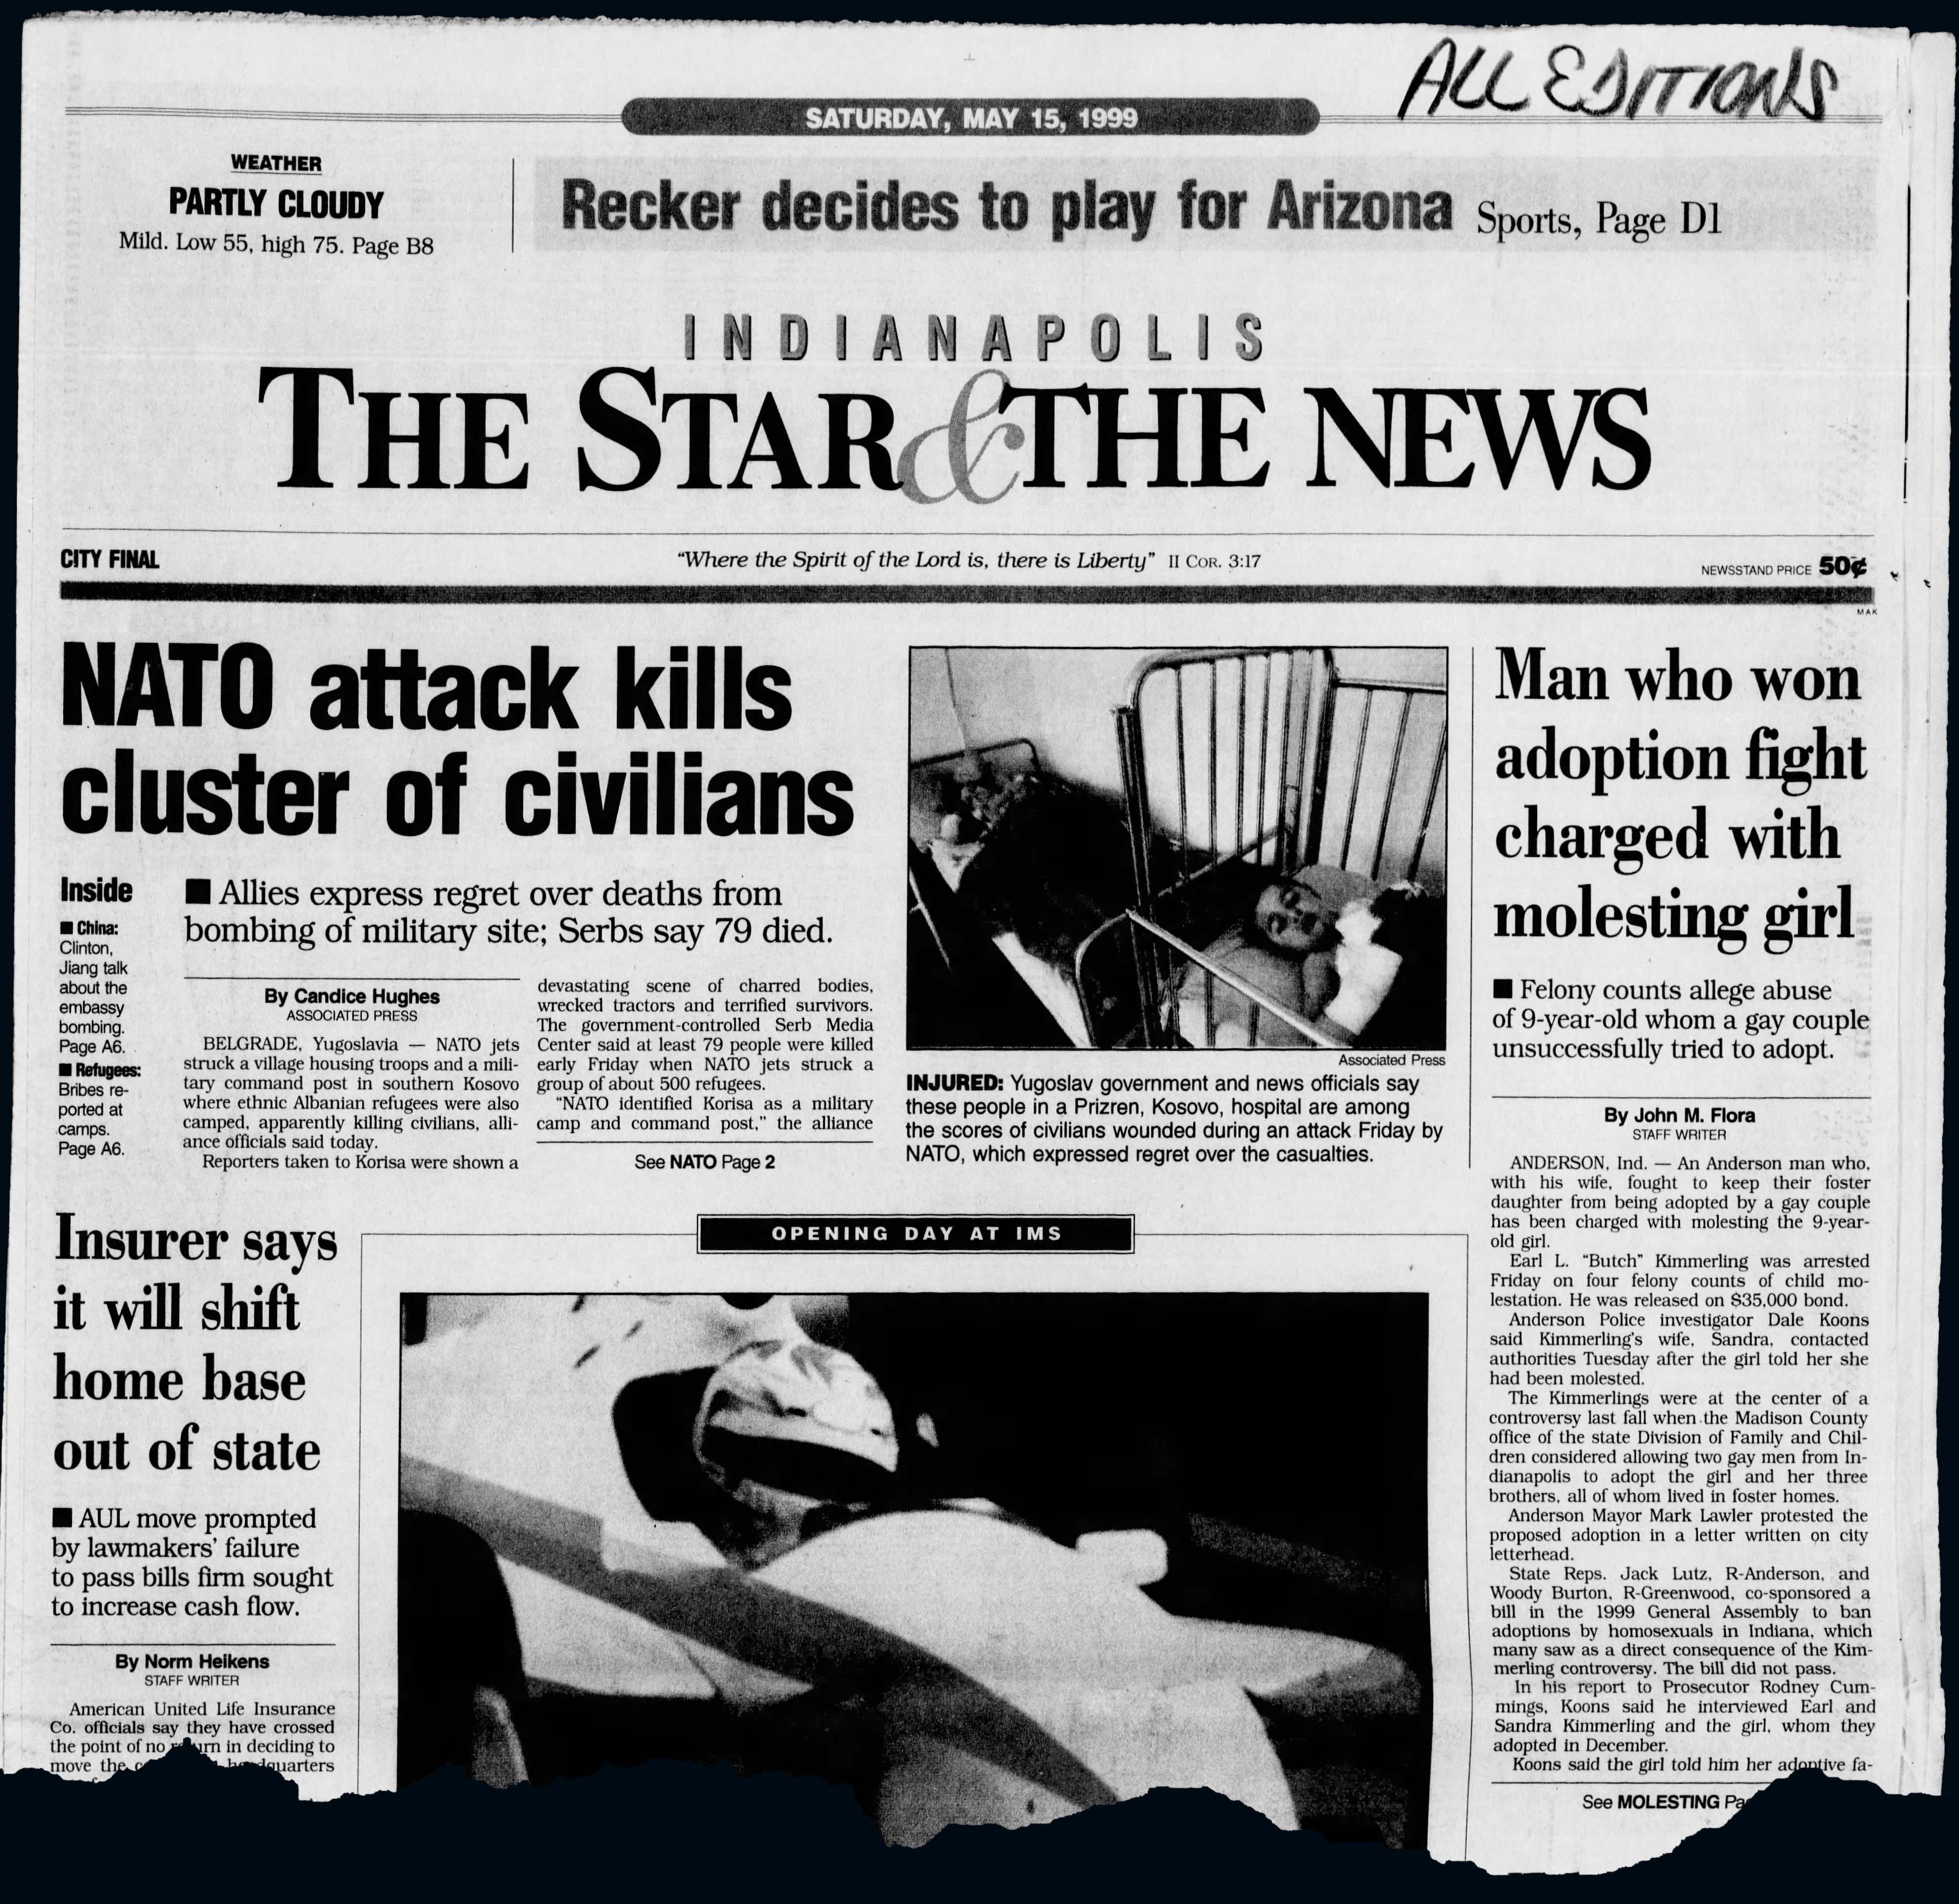 The May 15, 1999, edition of The (Indianapolis) Star & the News made public the child molestation charges against Ashley's adoptive father, who helped launch a campaign opposing adoption by same sex couples.